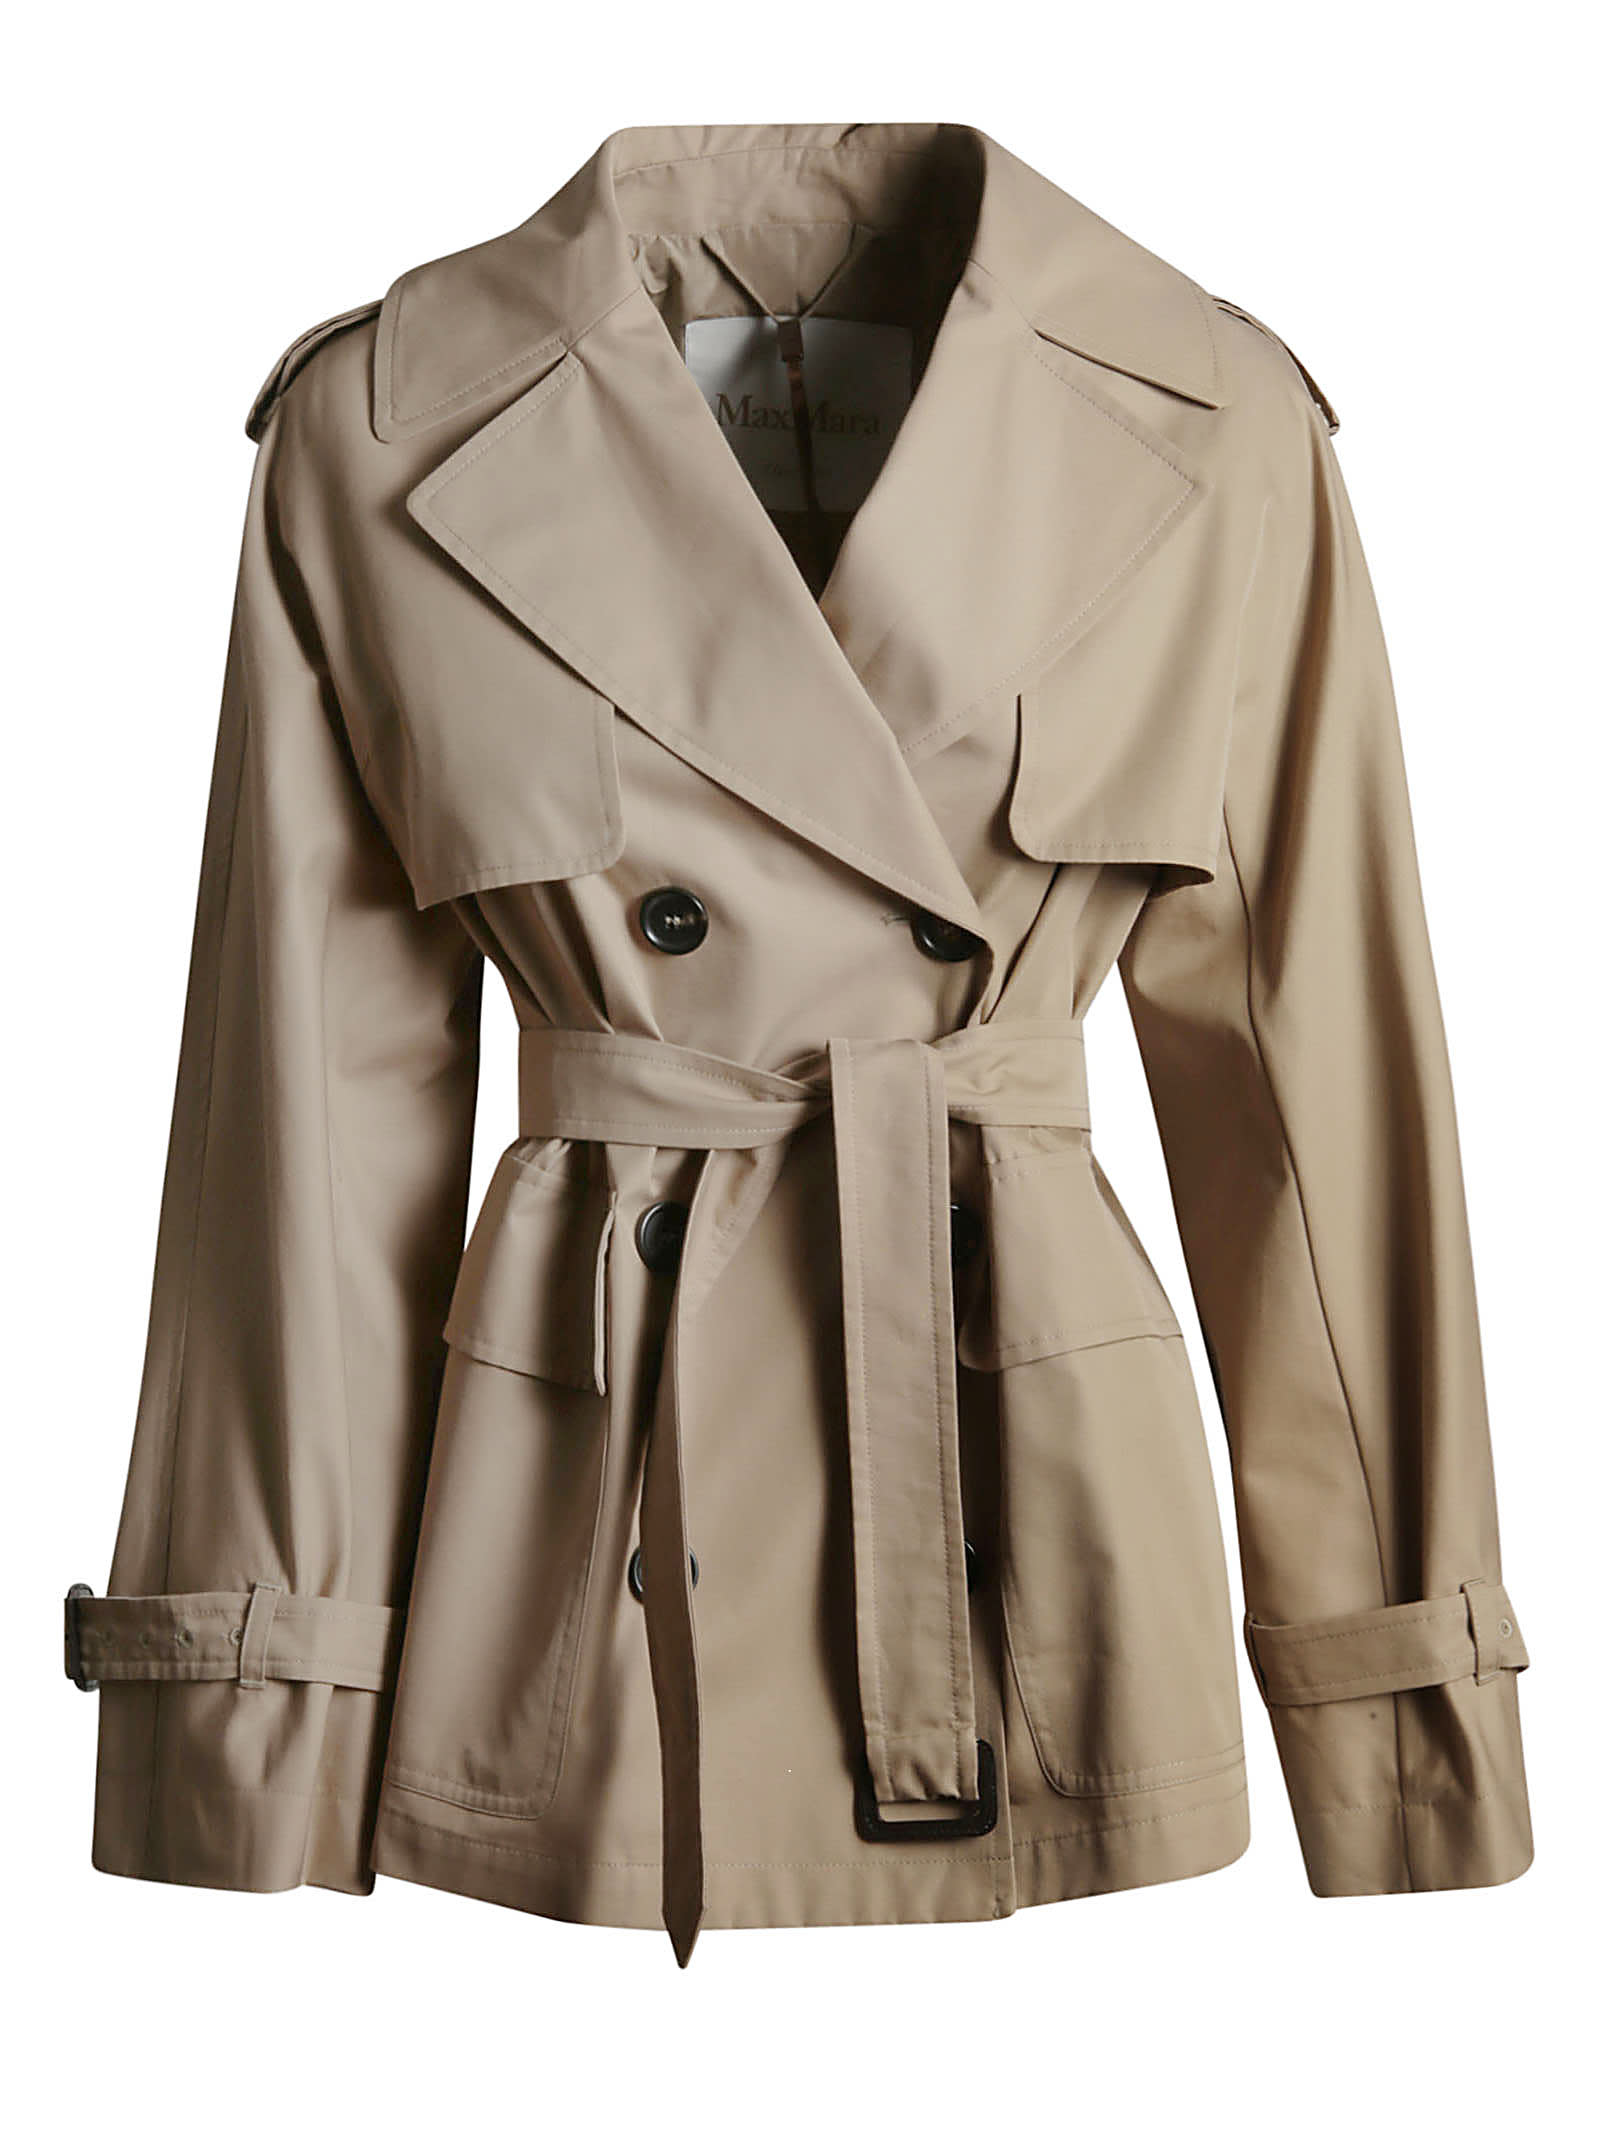 Max Mara The Cube Ctrench Trench | italist